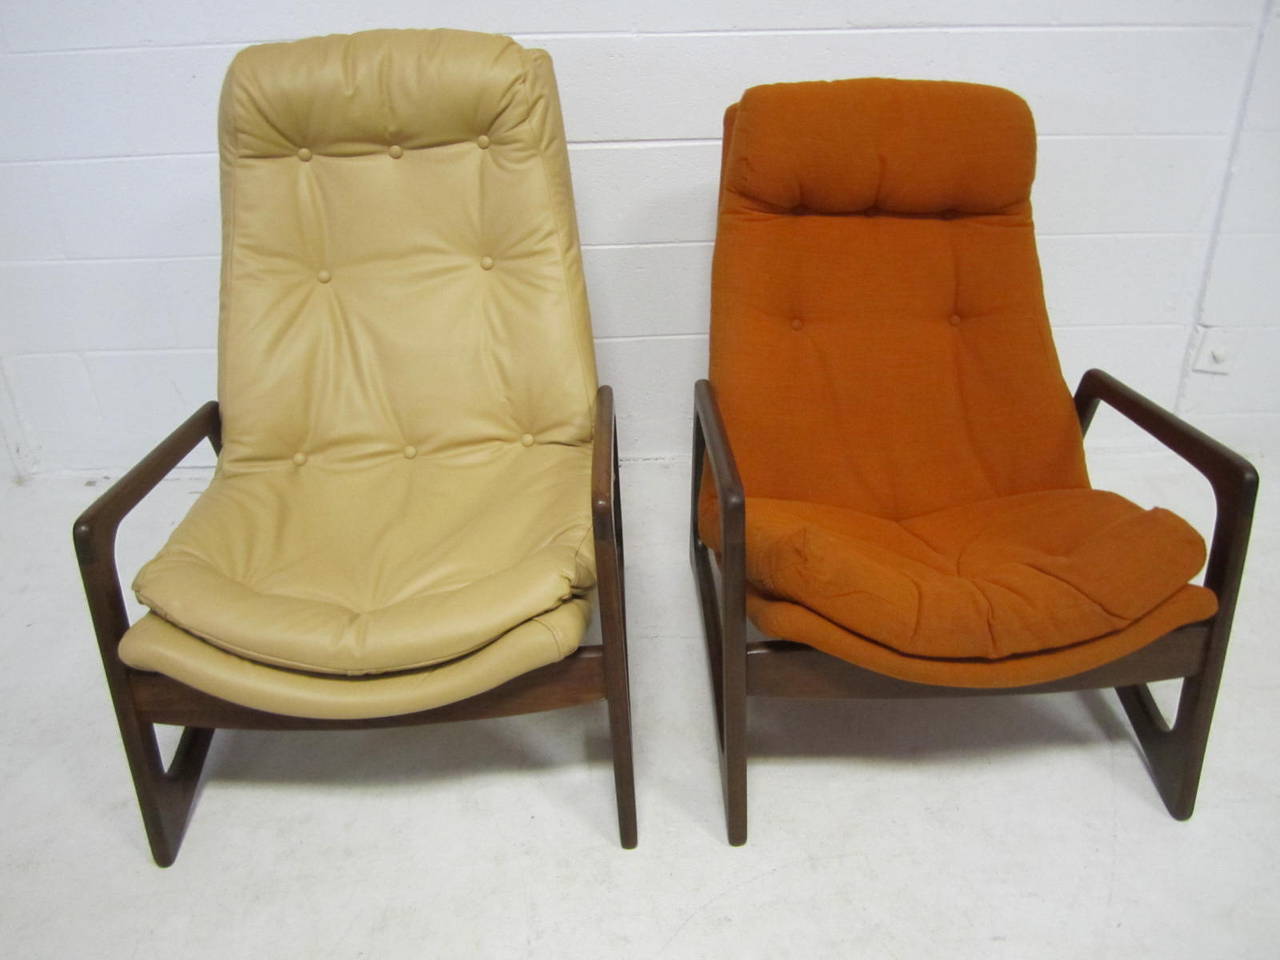 Sculptural Pair of Adrian Pearsall Walnut Lounge Chairs Mid-Century Modern For Sale 4